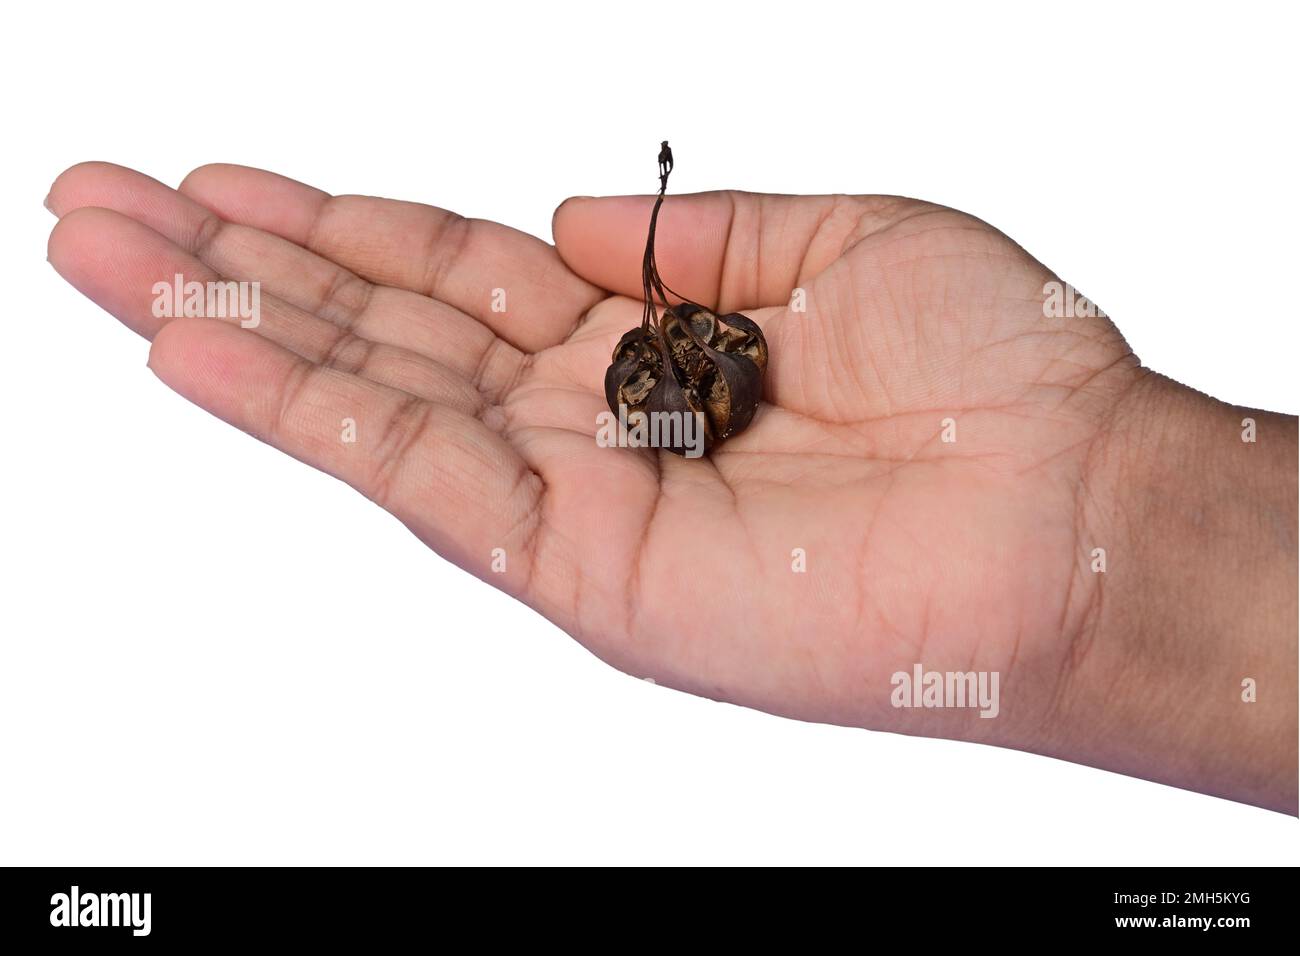 Woman's open palm with a dry out seed pod of an Aristolochia Indica on the palm in isolated background Stock Photo